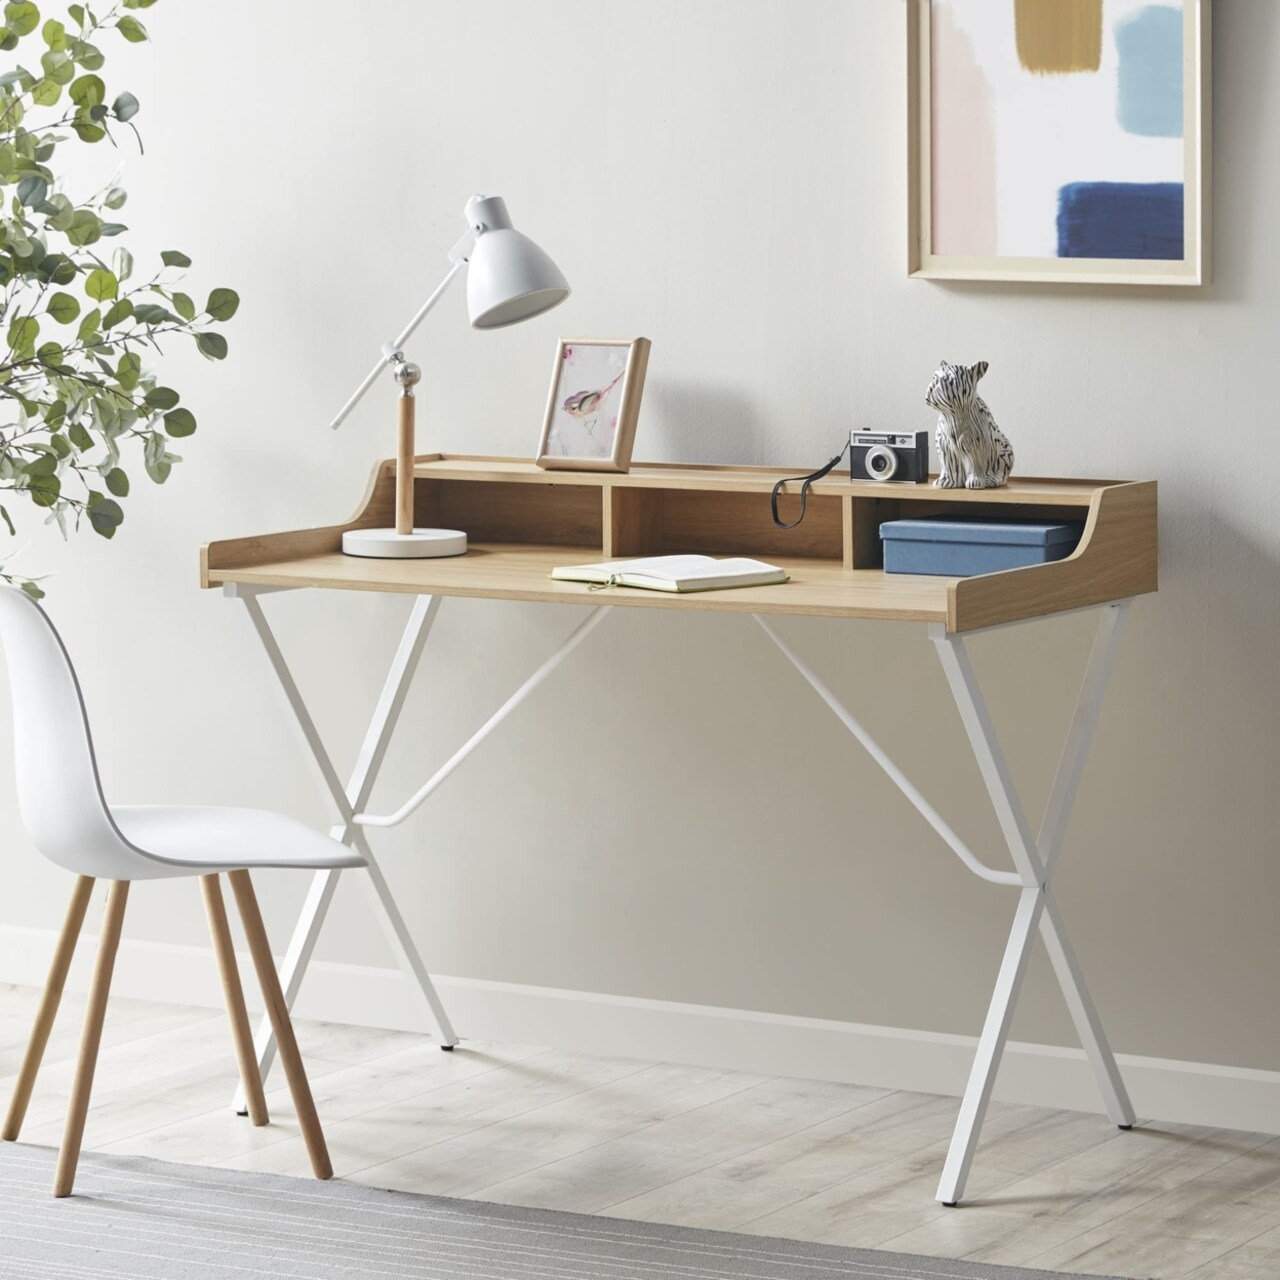 510 DESIGN Home Office Computer Desk for Small Spaces, Natural